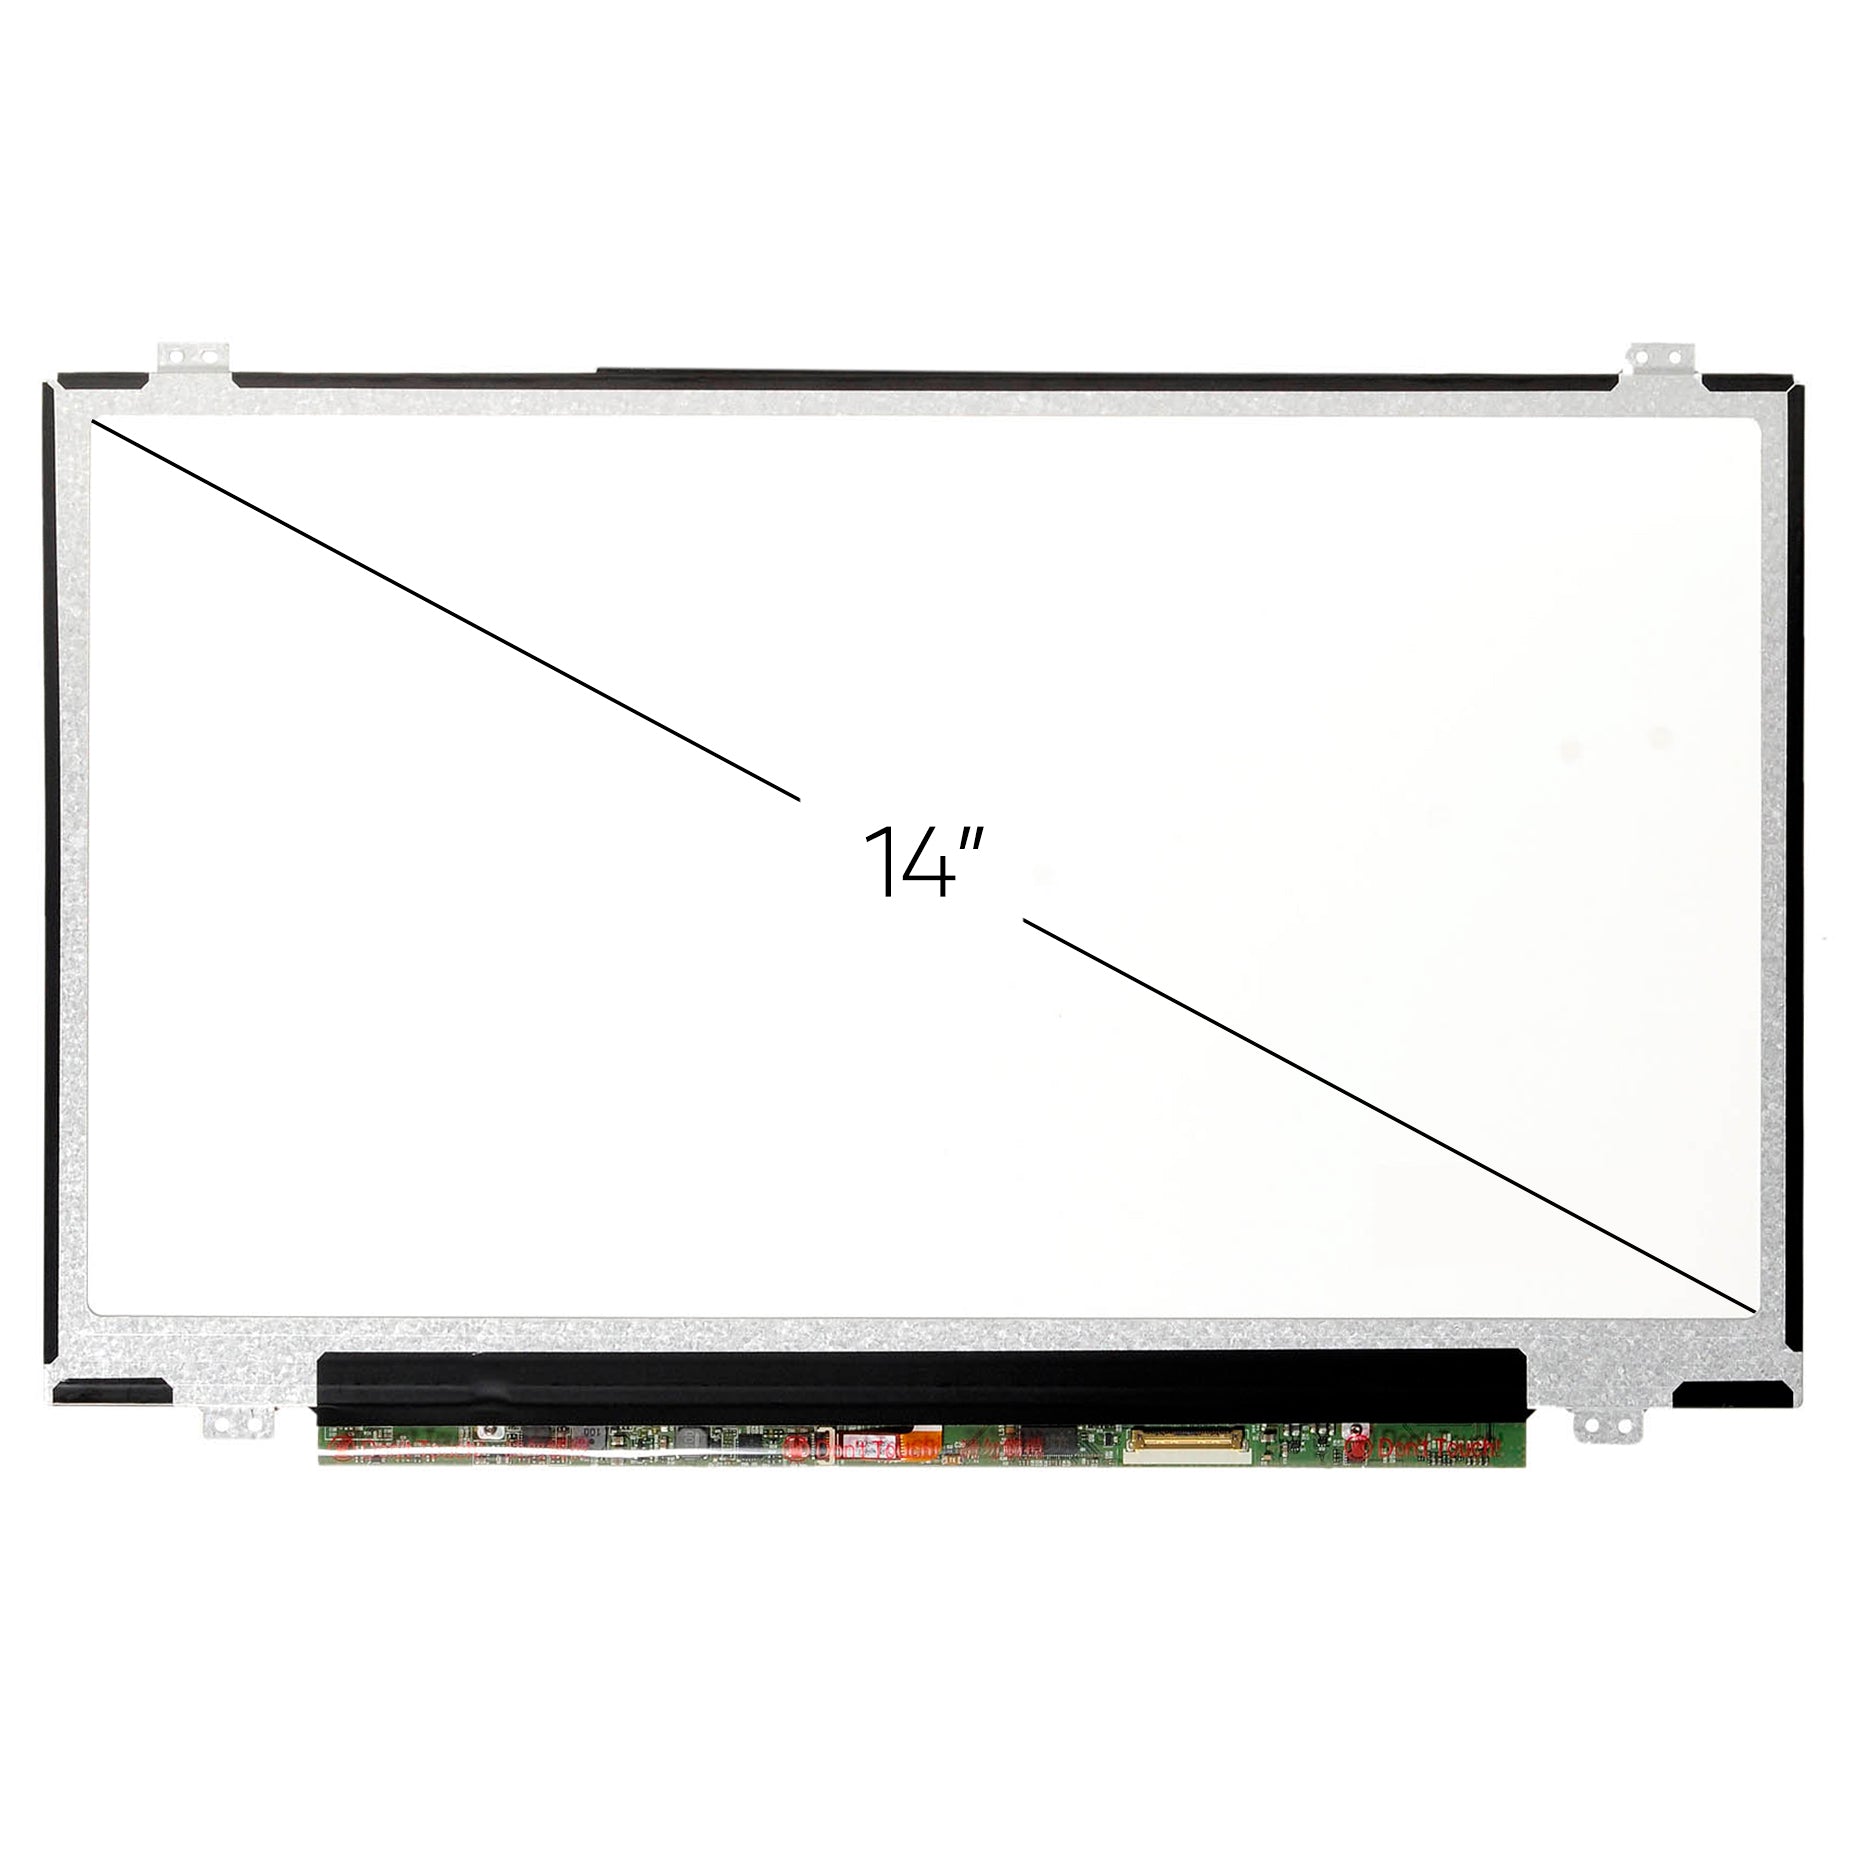 Screen Replacement for Dell Latitude 5490 FHD 1920x1080 Matte LCD LED Display